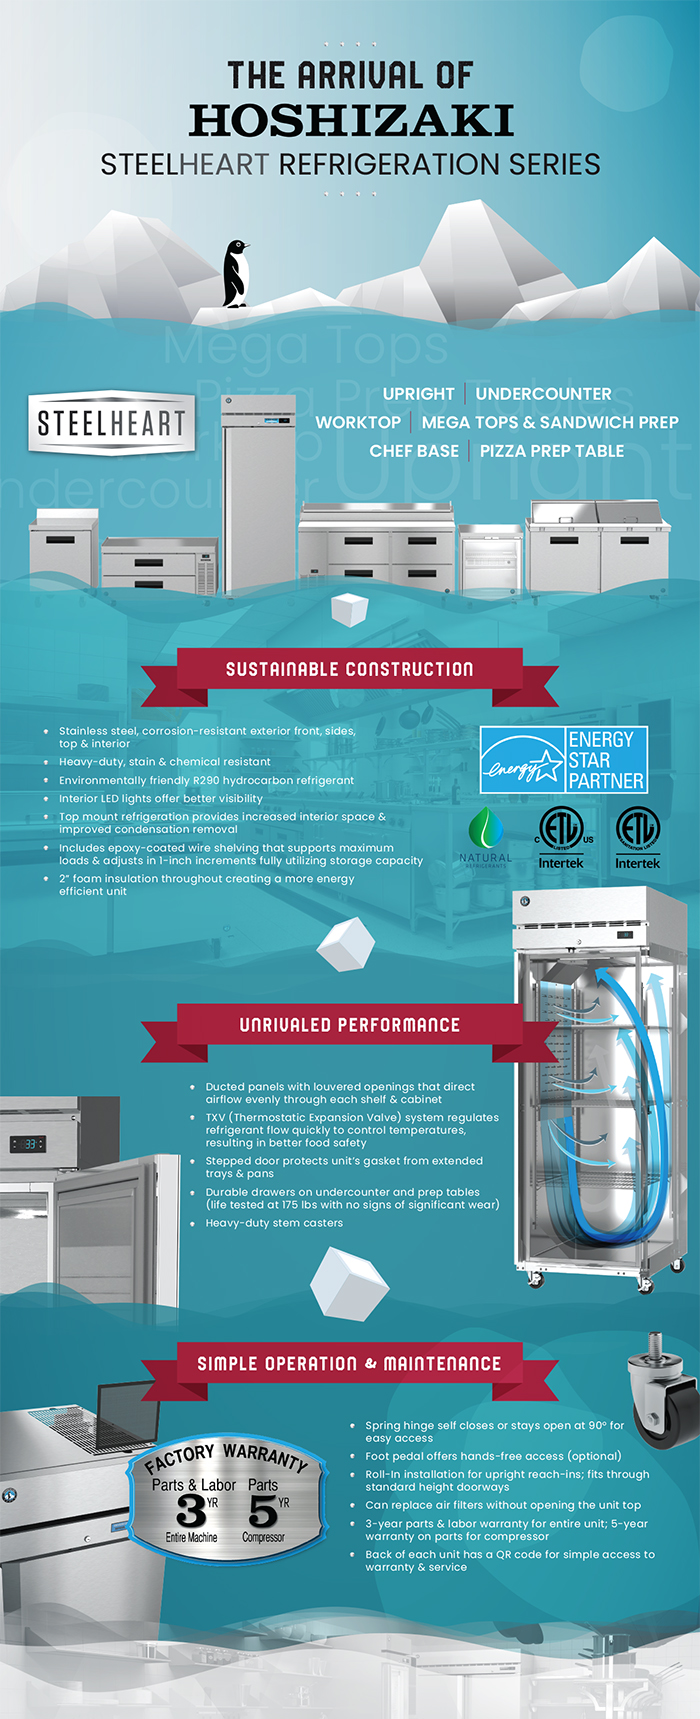 The Arrival of Hoshizaki Steelheart Refrigeration Series - Upright, Undercounter, Worktop, Mega Tops & Sandwich Prep, Chef Base, Pizza Prep Table - Sustainable Construction - Unrivaled Performance - Simple Operation & Maintenance